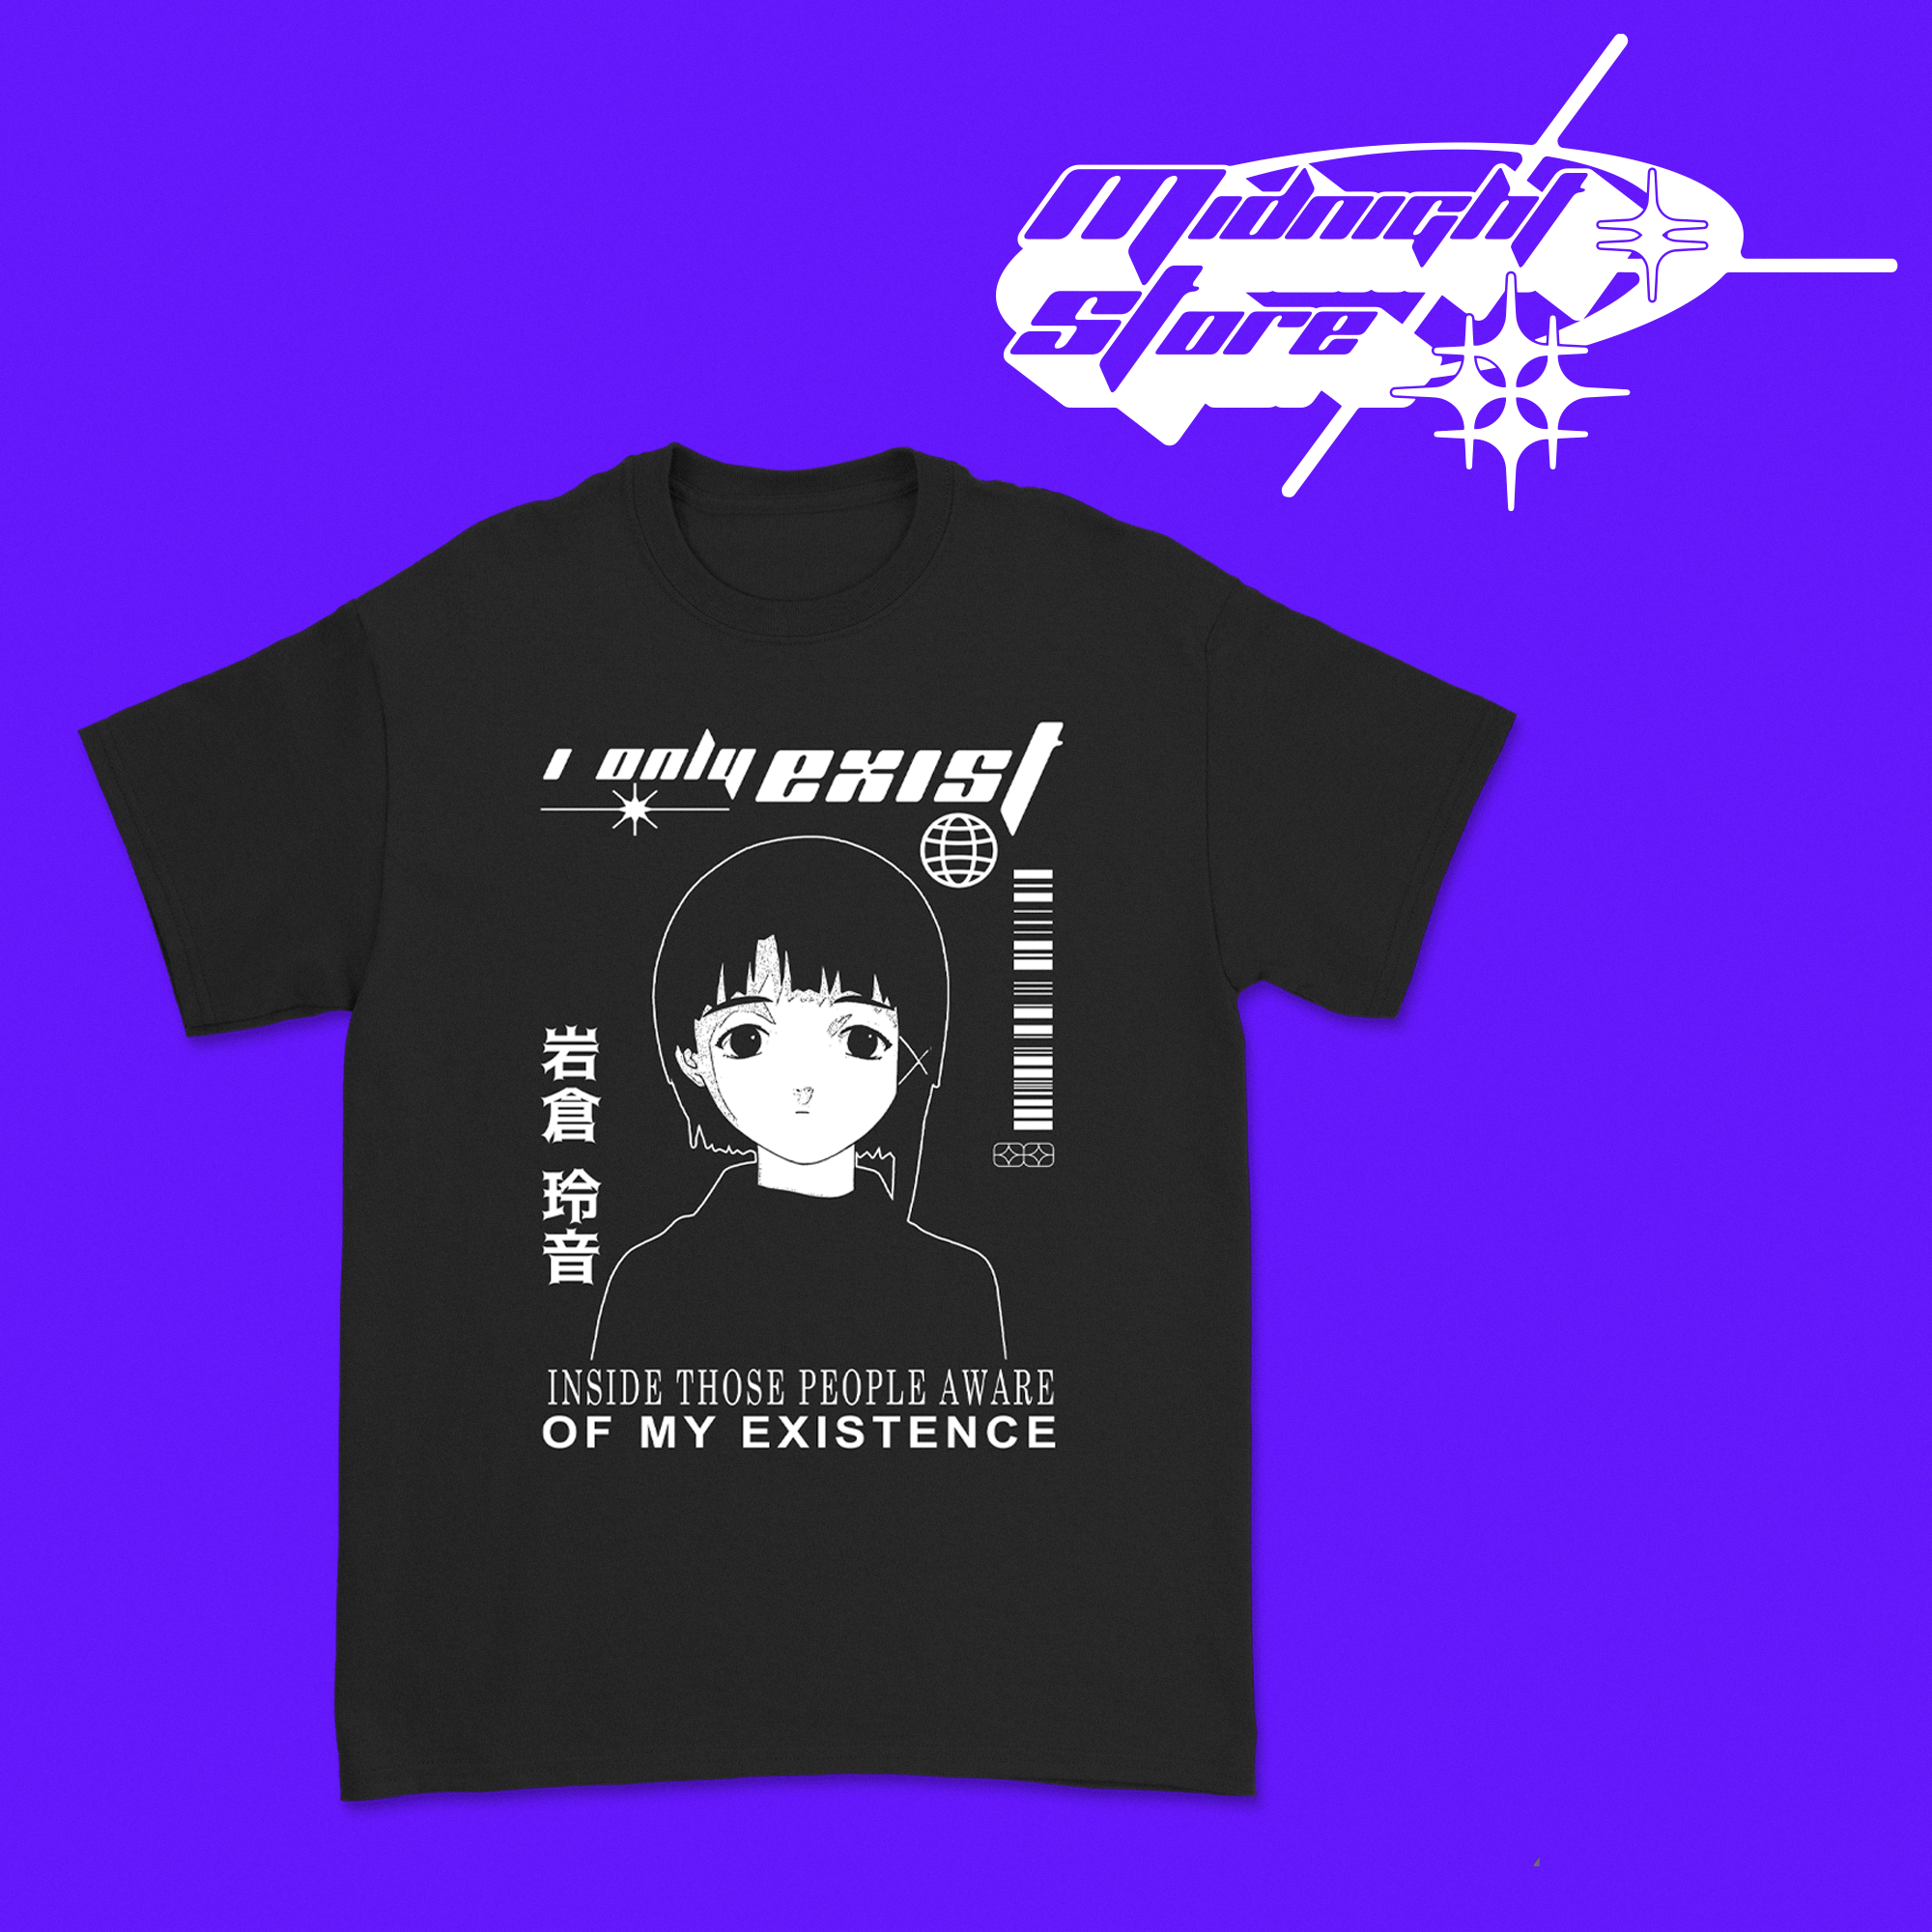 Serial Experiments Lain Aware Of My Existence MC